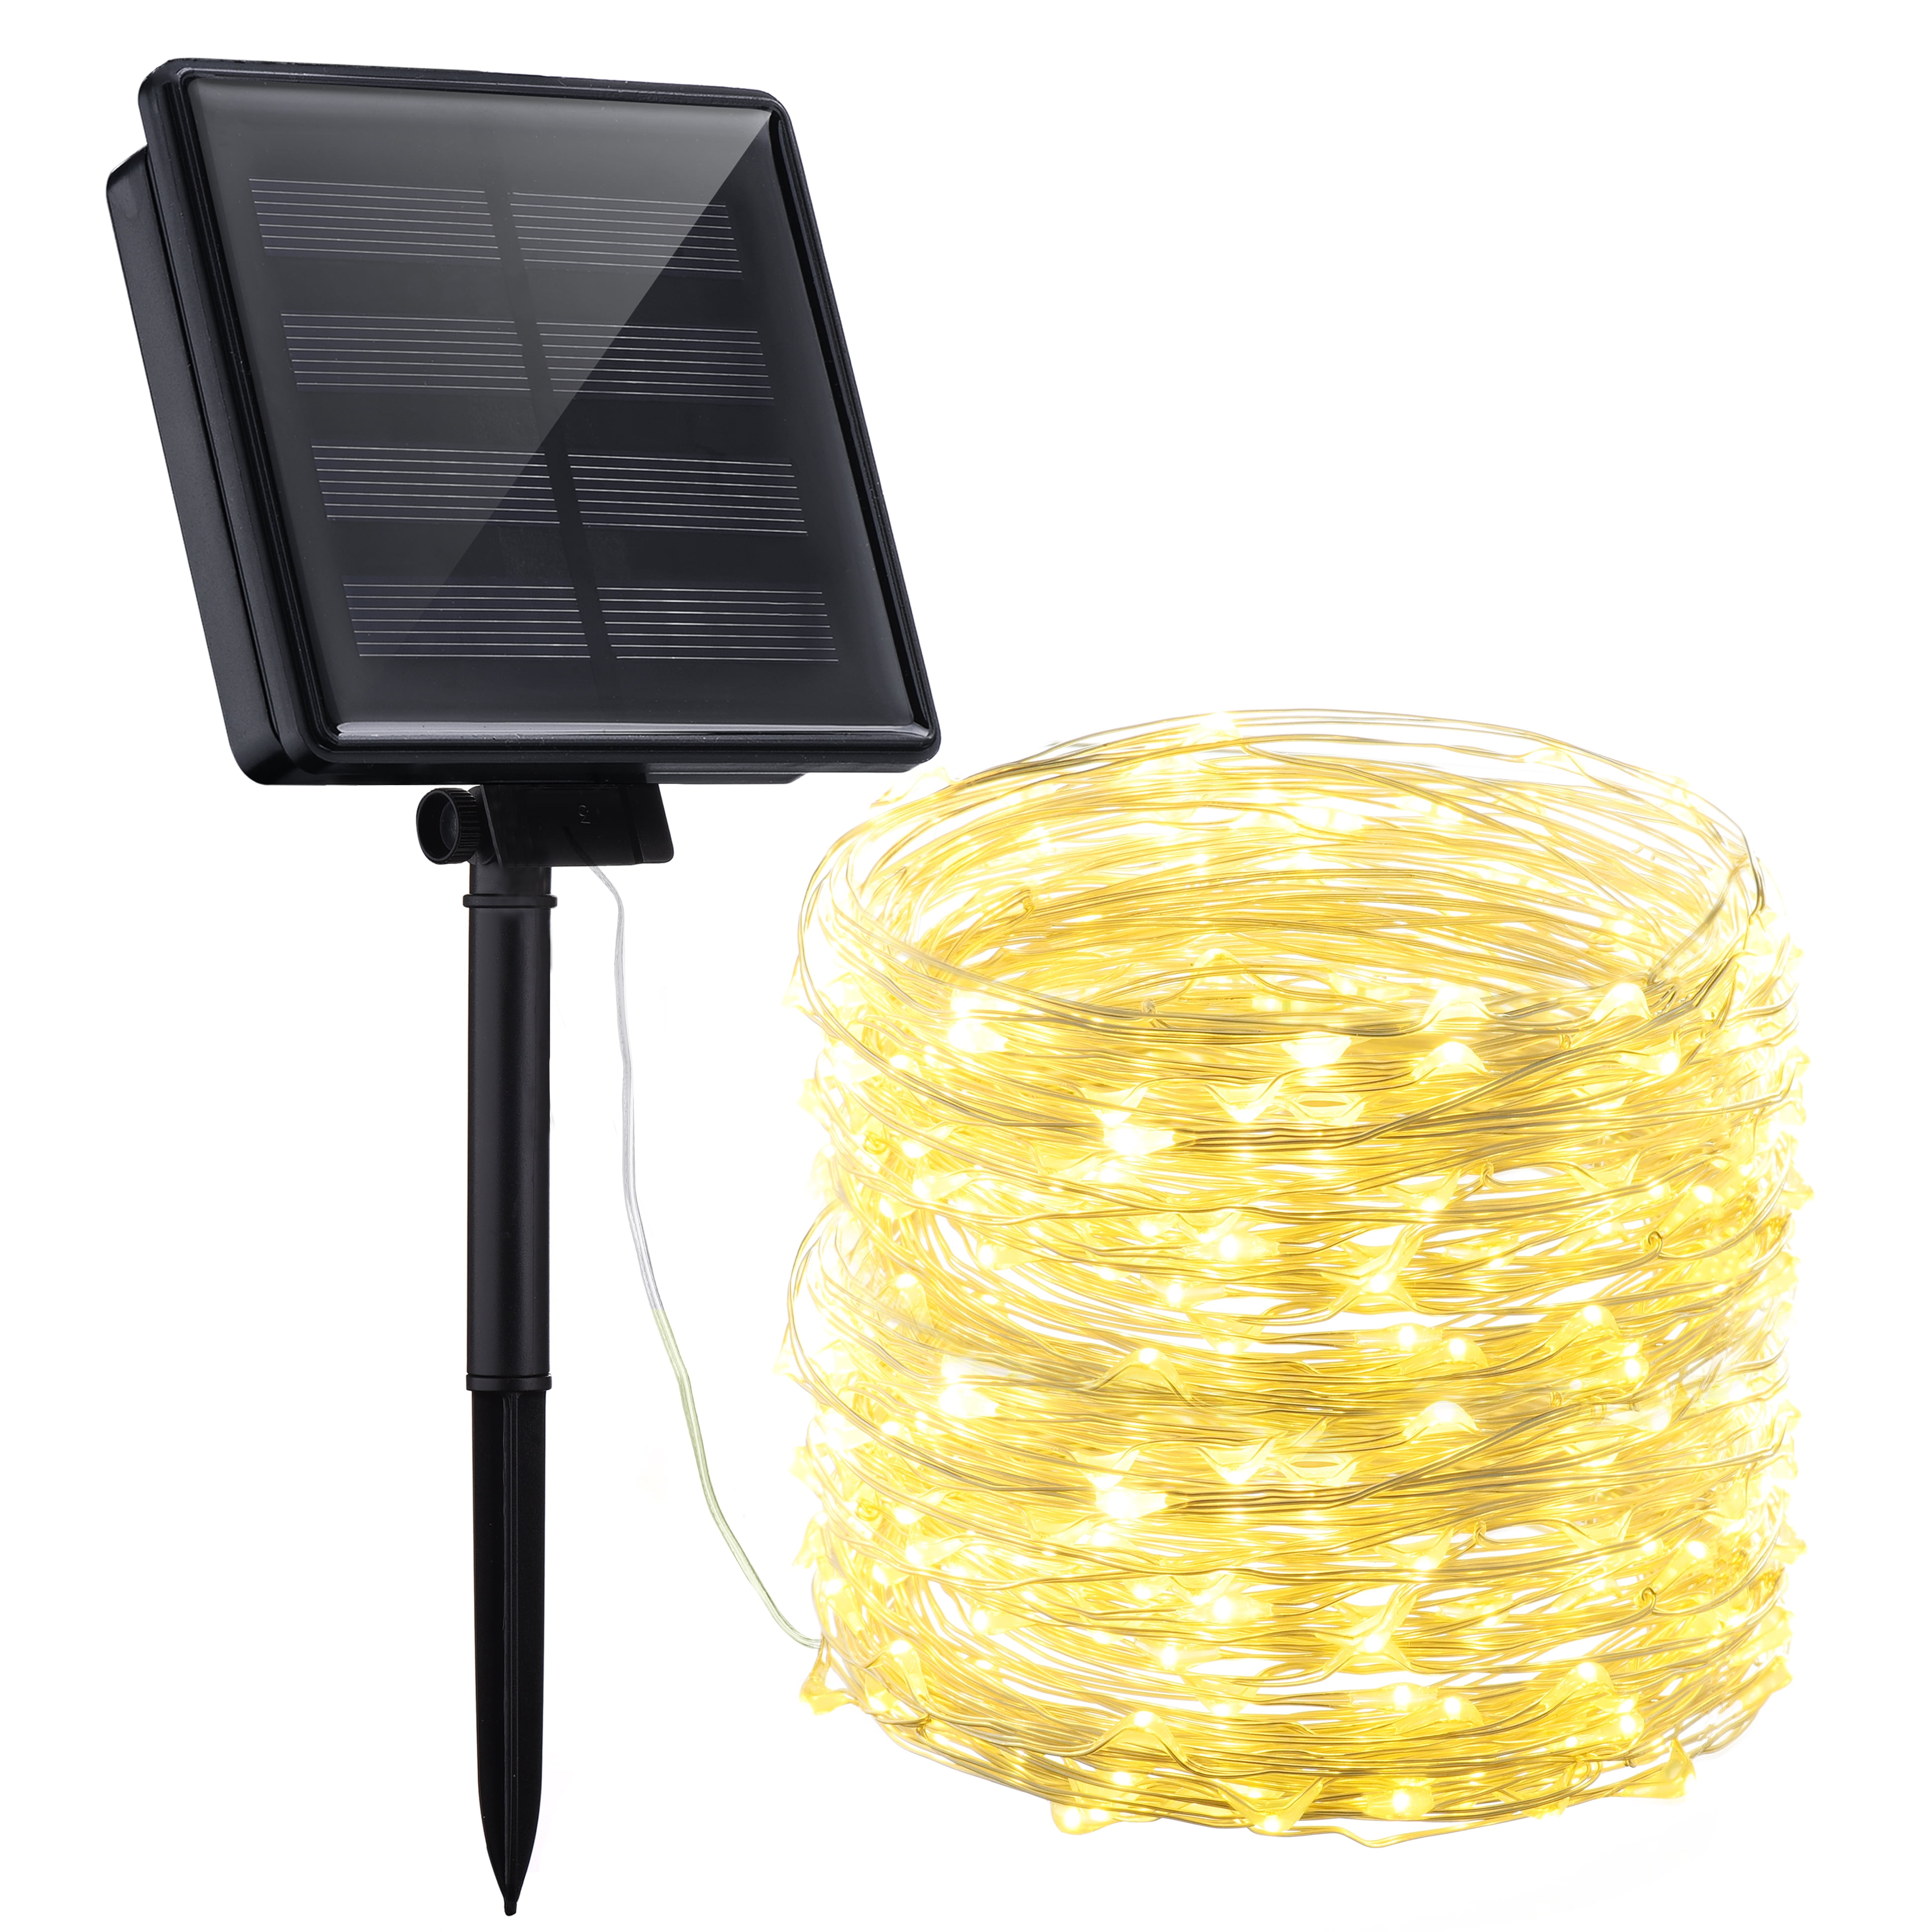 Details about   Outdoor Solar Fairy String Lights 200 LED Copper Wire Waterproof Garden Decor 